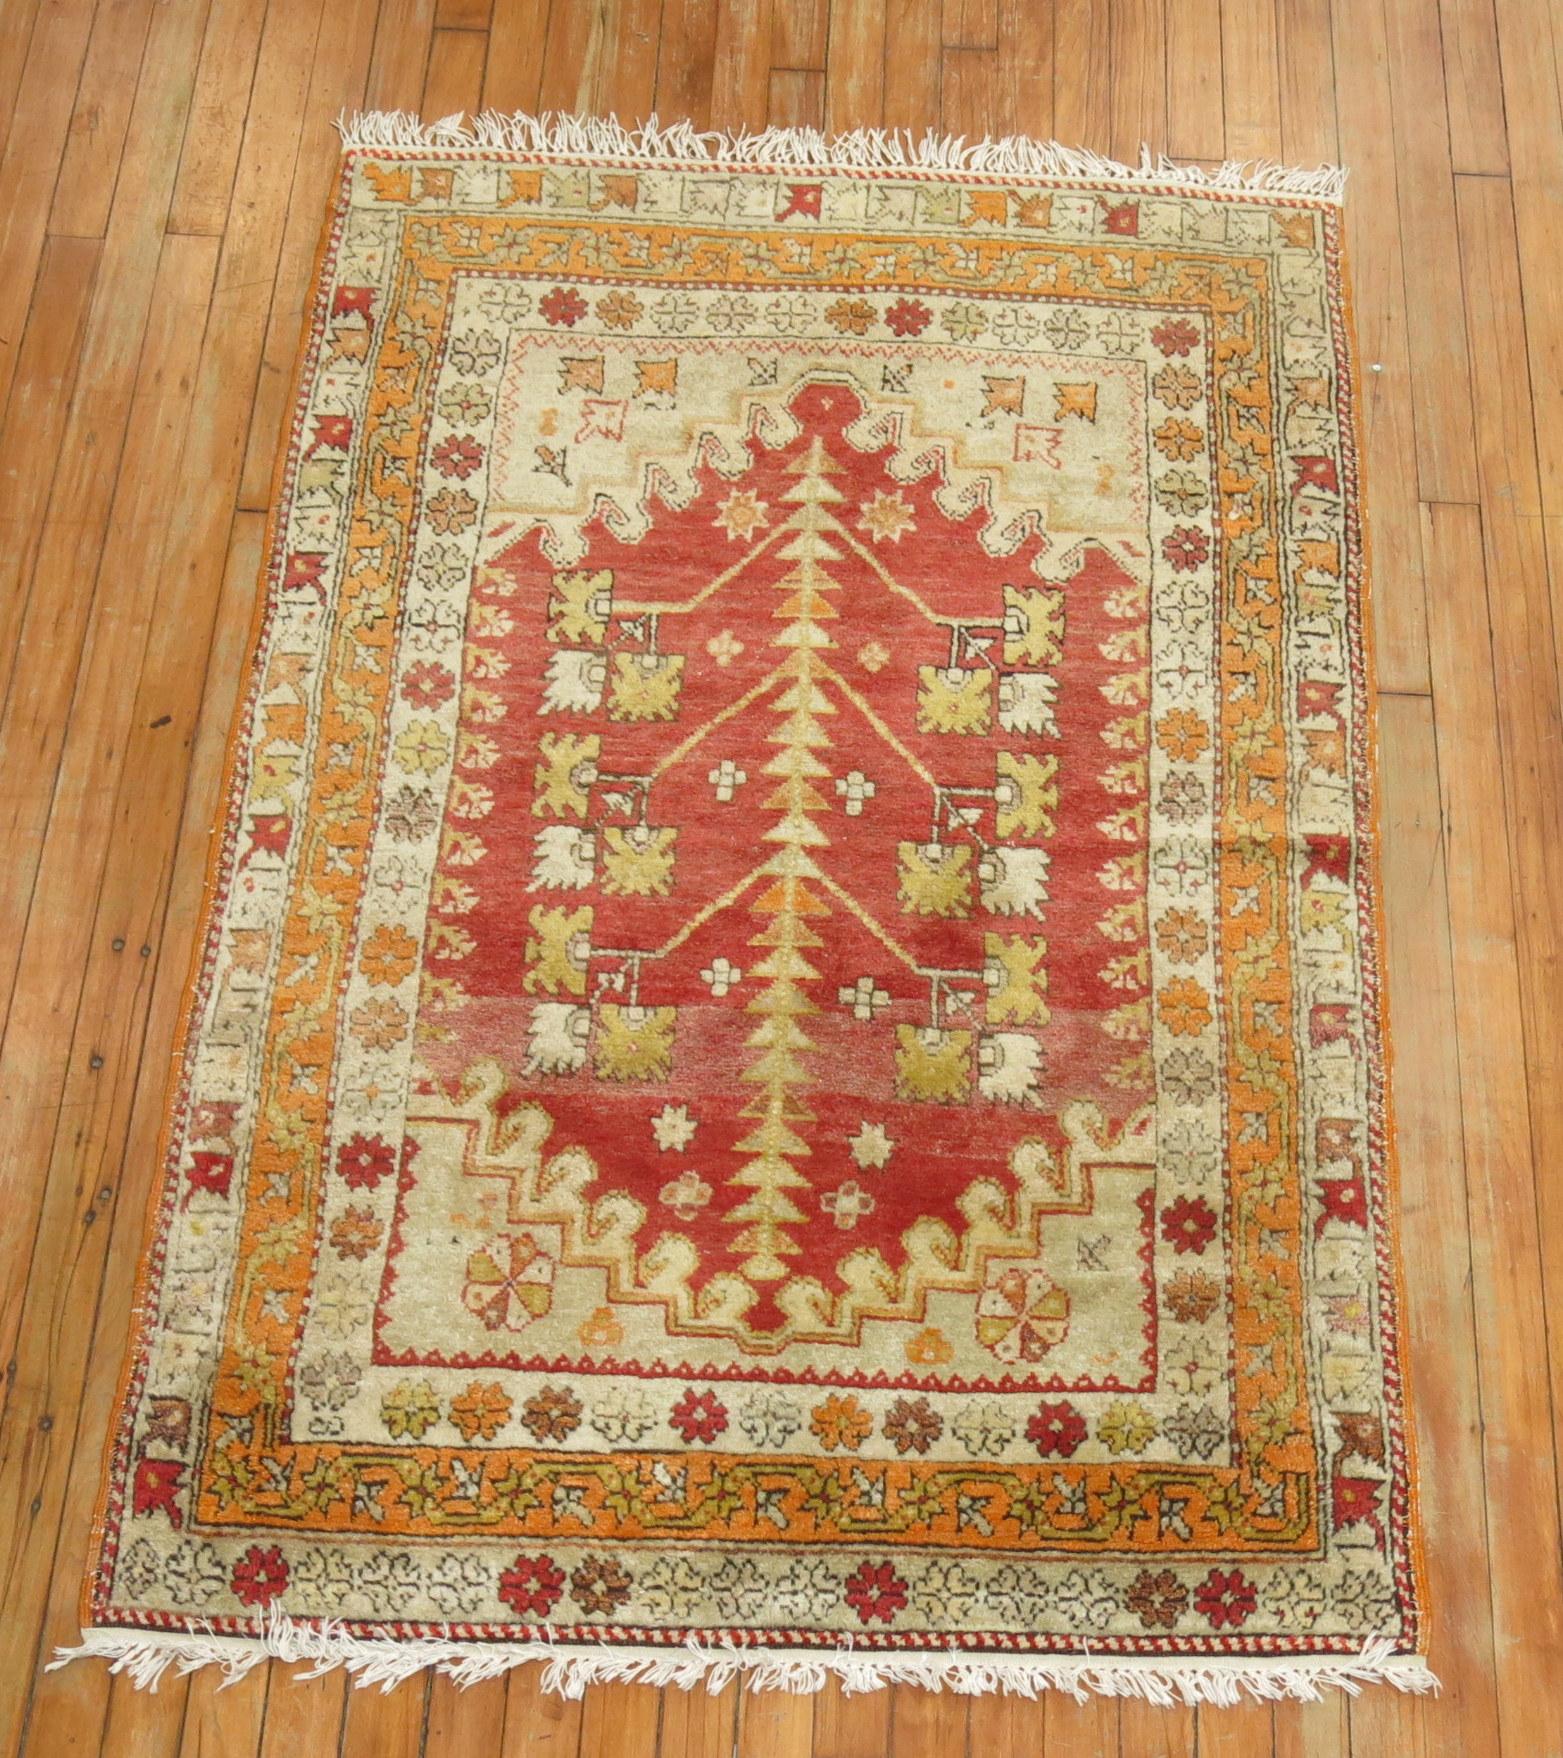 A one of a kind fine quality antique Turkish Sivas decorative throw rug. Reds, orange and gray accents. Probably used as a prayer rug from original owner,

circa 1930, measures: 3'5